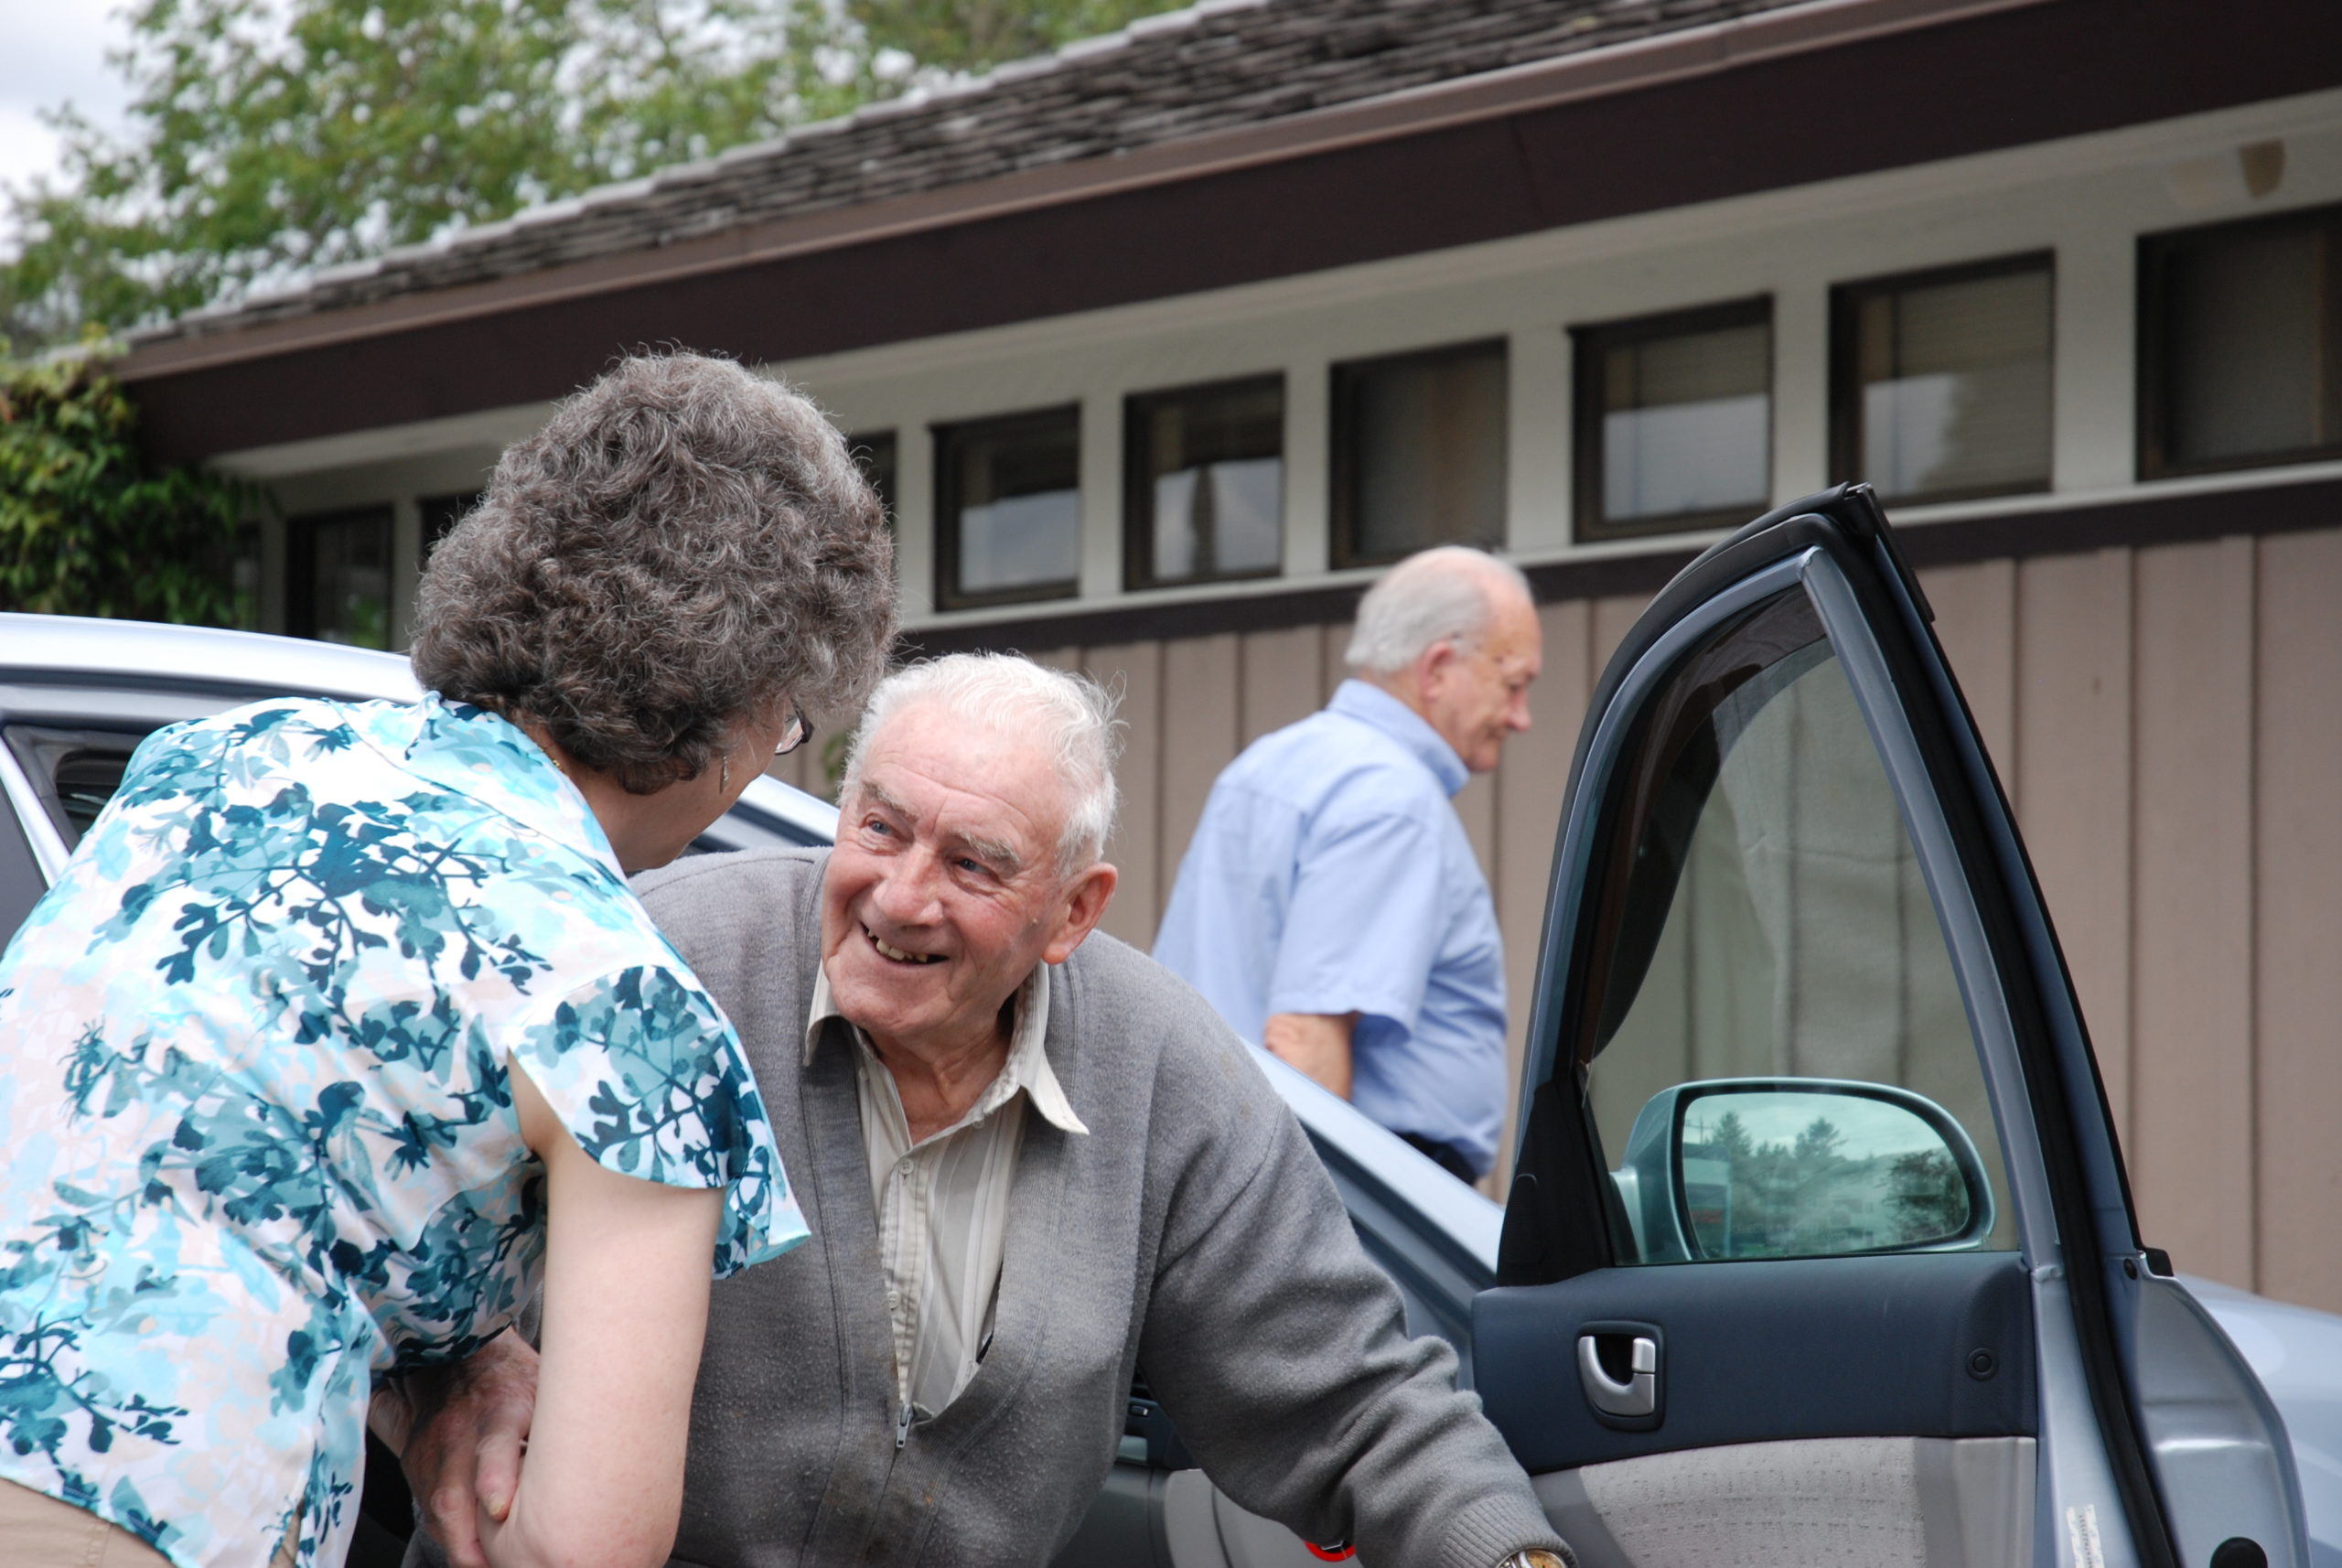 Senior Better at Home Client getting help out of a car.